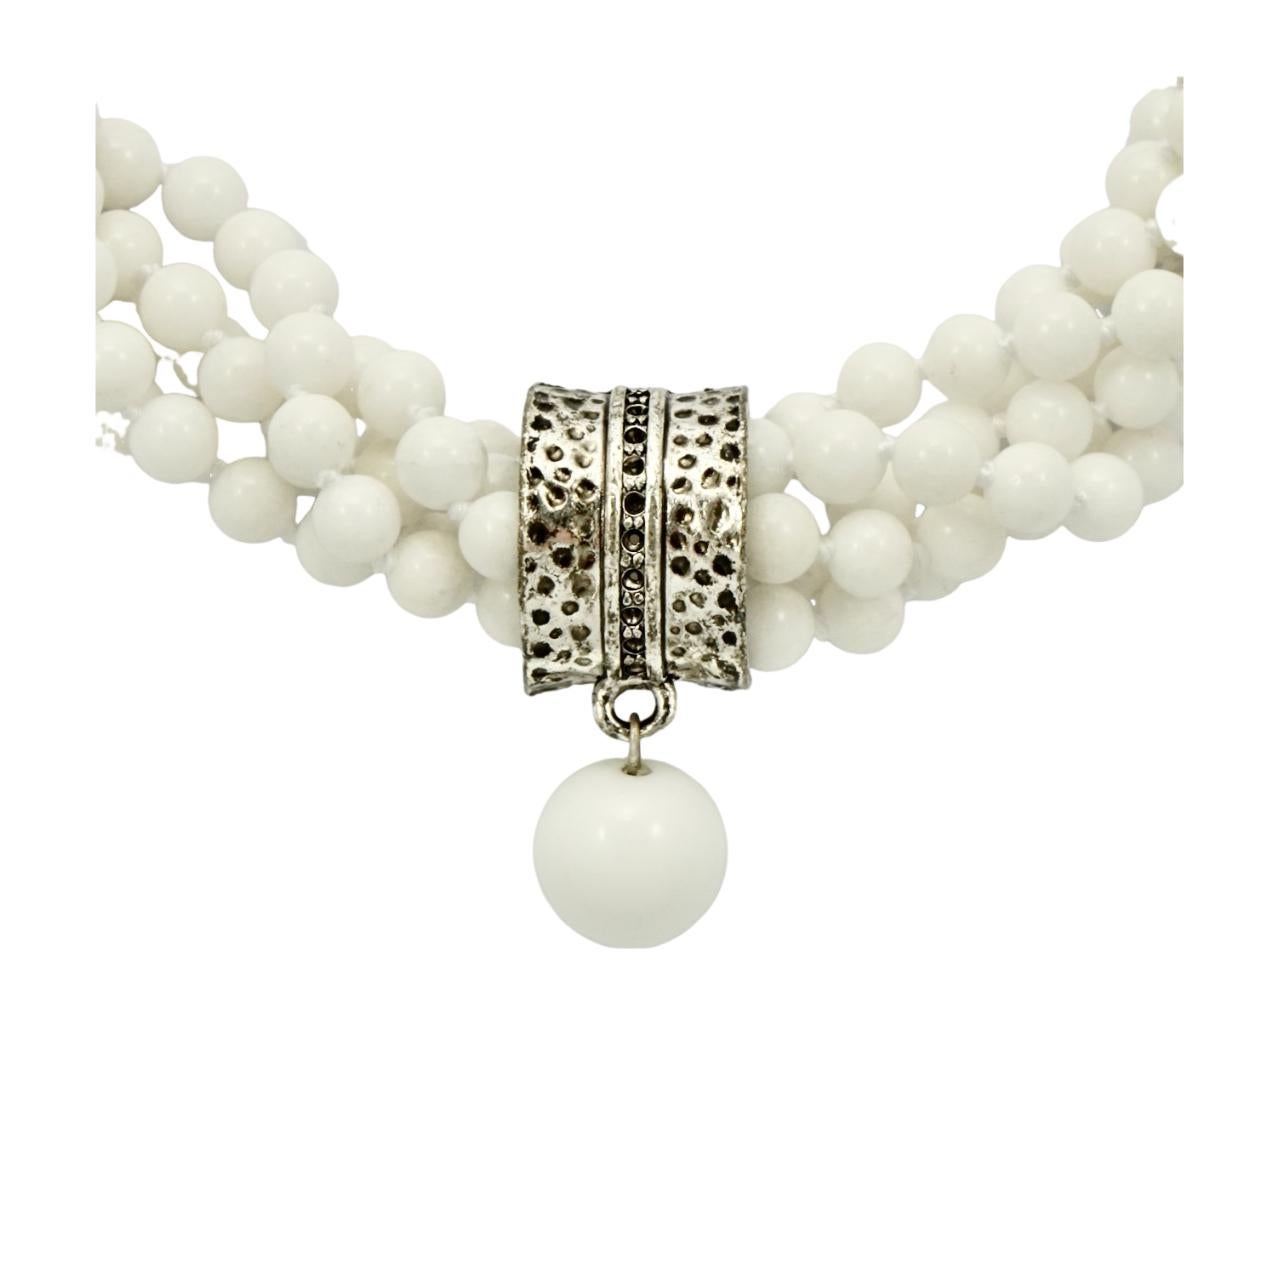 Wonderful five strand twisted white bead necklace, featuring a silver plated and black enamel centrepiece. The beads are knotted between each bead, and the centrepiece is free moving on the necklace. The pendant is white glass, the necklace beads